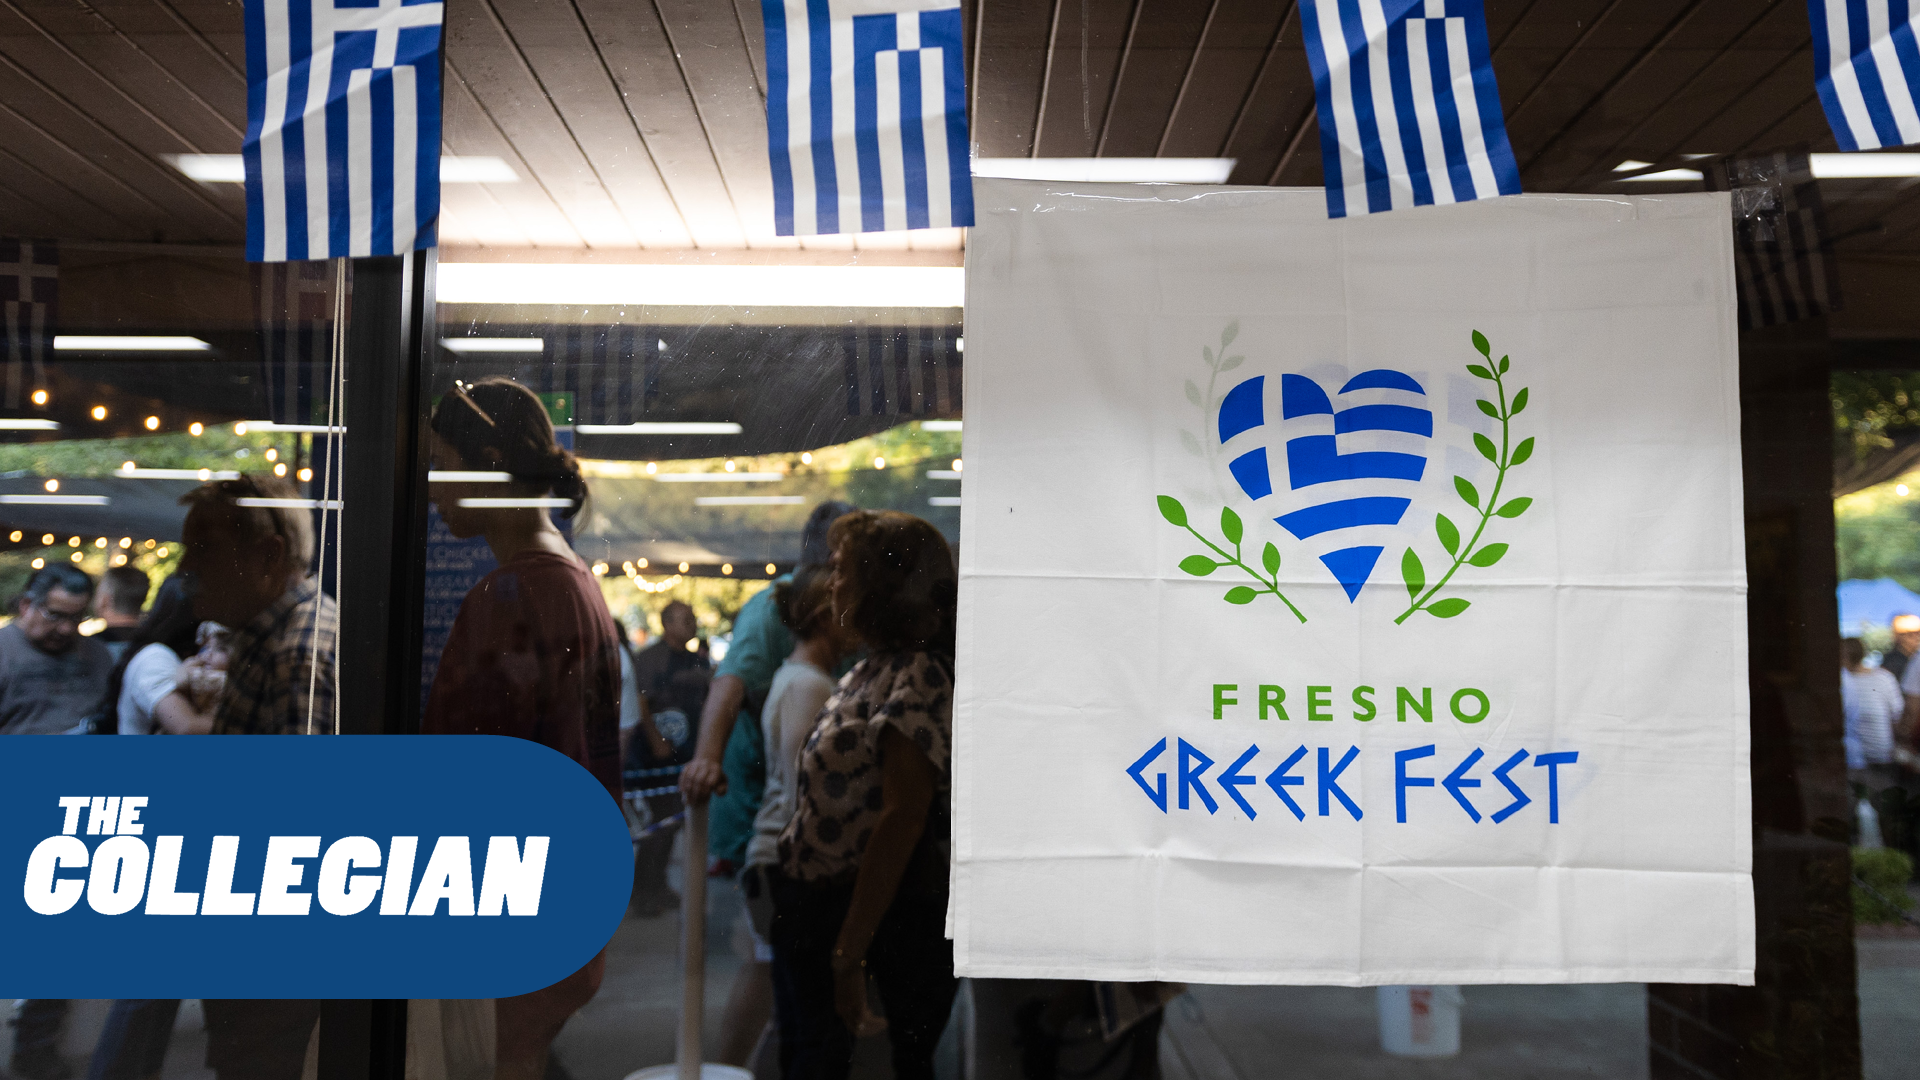 A sign promoting Greek Fest located in the main dining hall of the event. (Carlos Rene Castro/The Collegian)